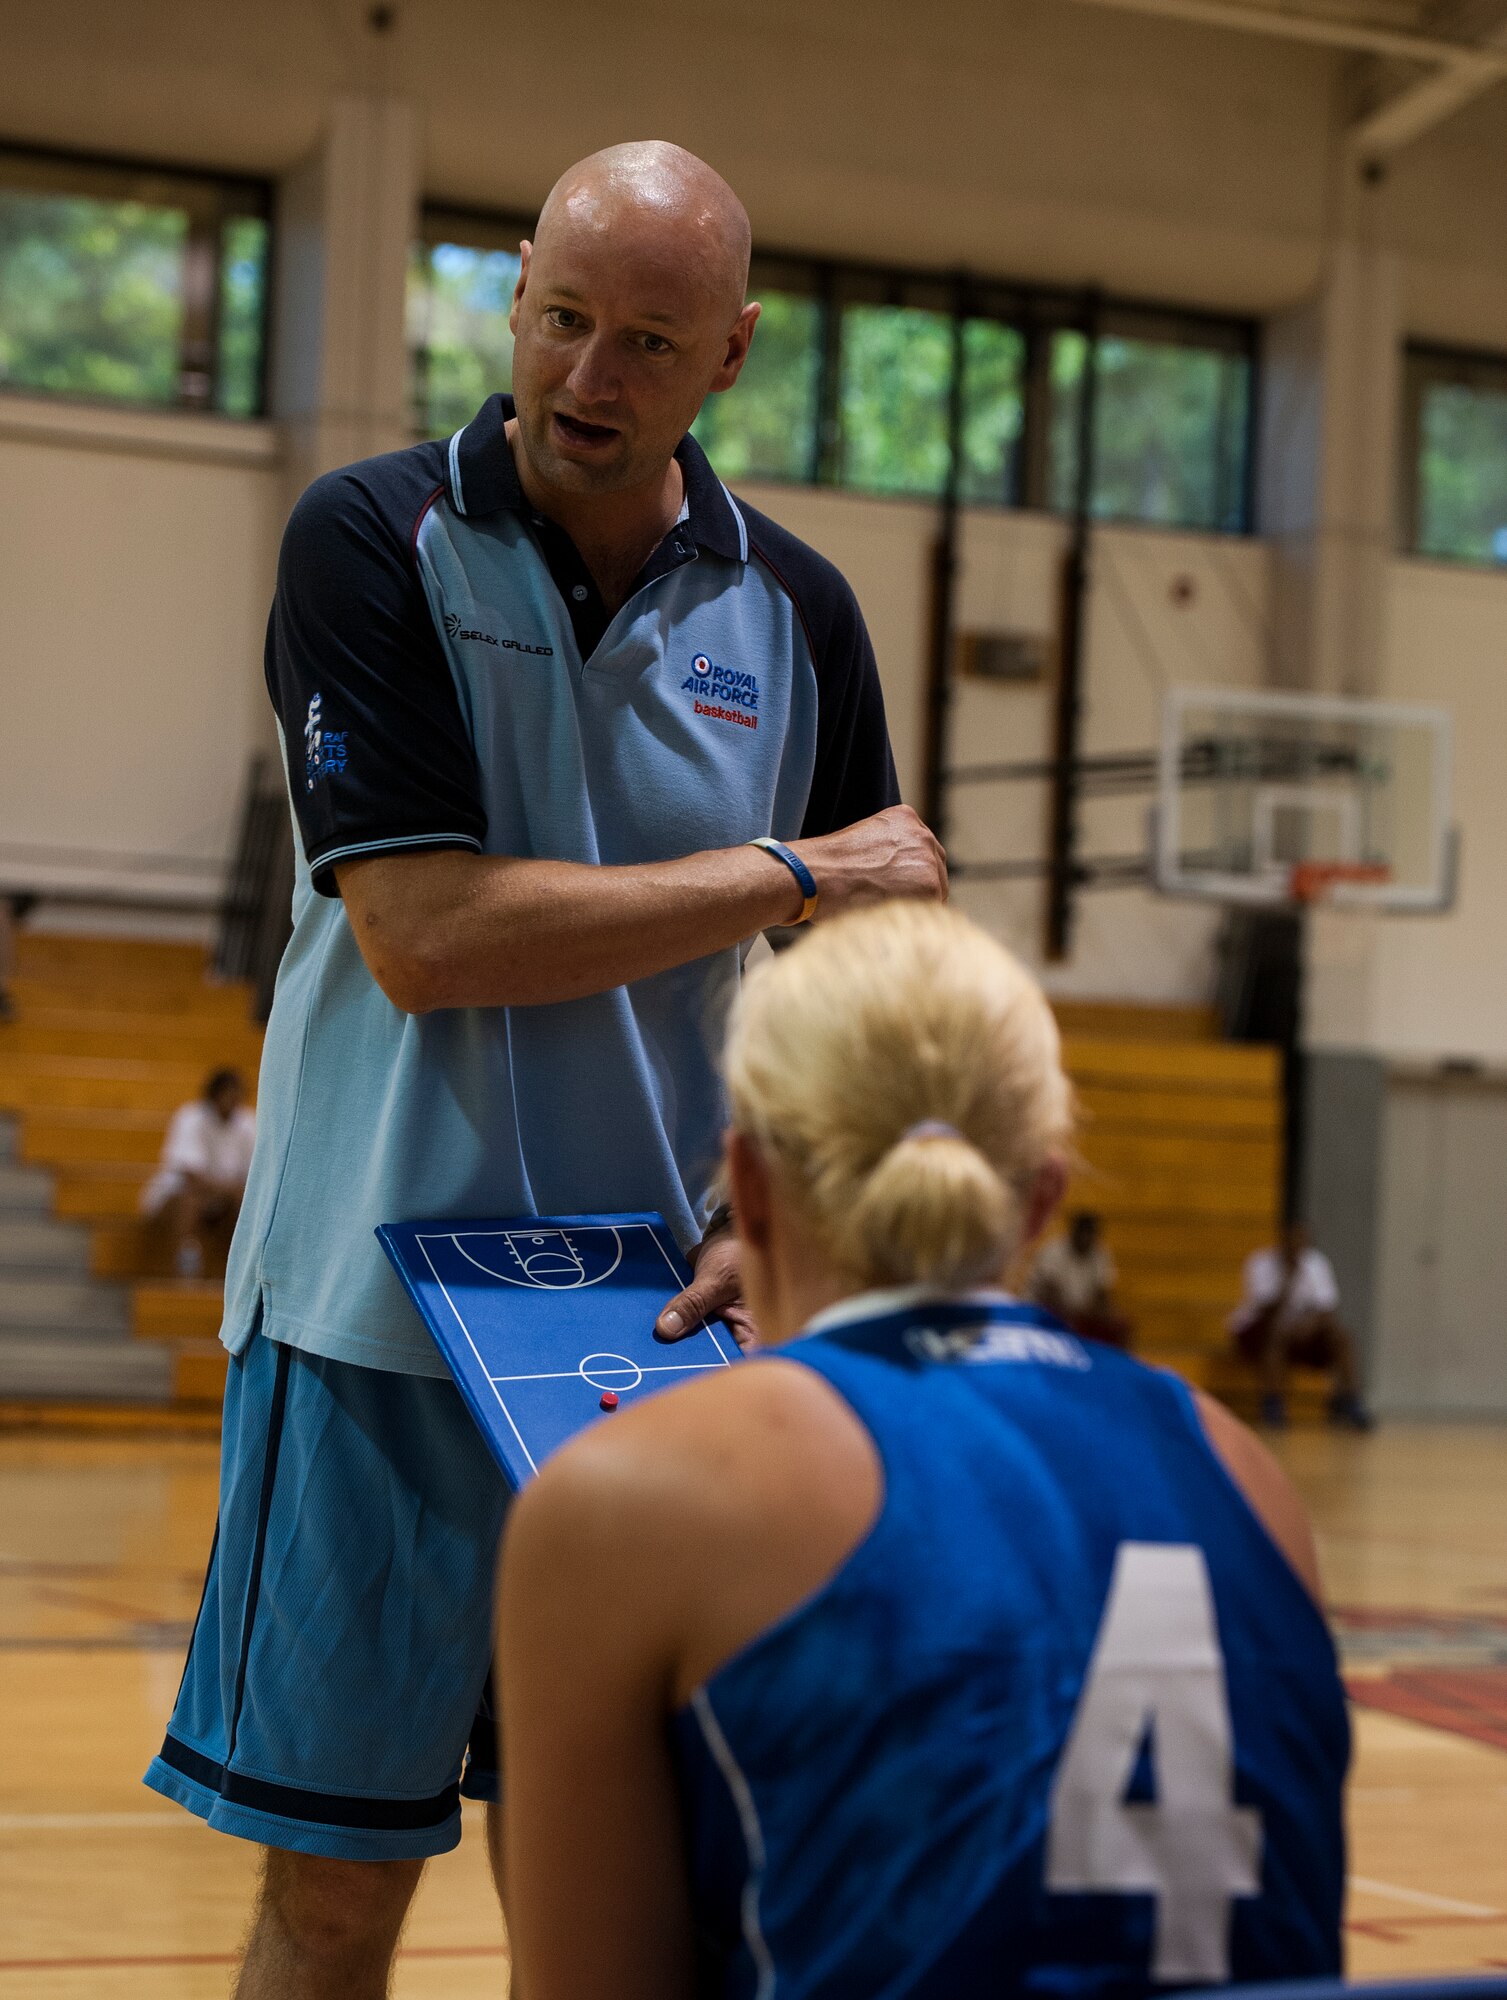 U.K. Royal Air Force Sgt. Mark Reynolds, coach of the women's RAF basketball team, gives a couple of tips and pointers to Cpl. Emma Fare during a scrimmage at the Aderholt Gym on Hurlburt Field, Fla., June 19, 2012. The RAF basketball teams have been coming to Hurlburt Field for a two-week basketball camp for seven years with the exception of last year. (U.S. Air Force photo by Airman 1st Class Christopher Williams) (RELEASED)